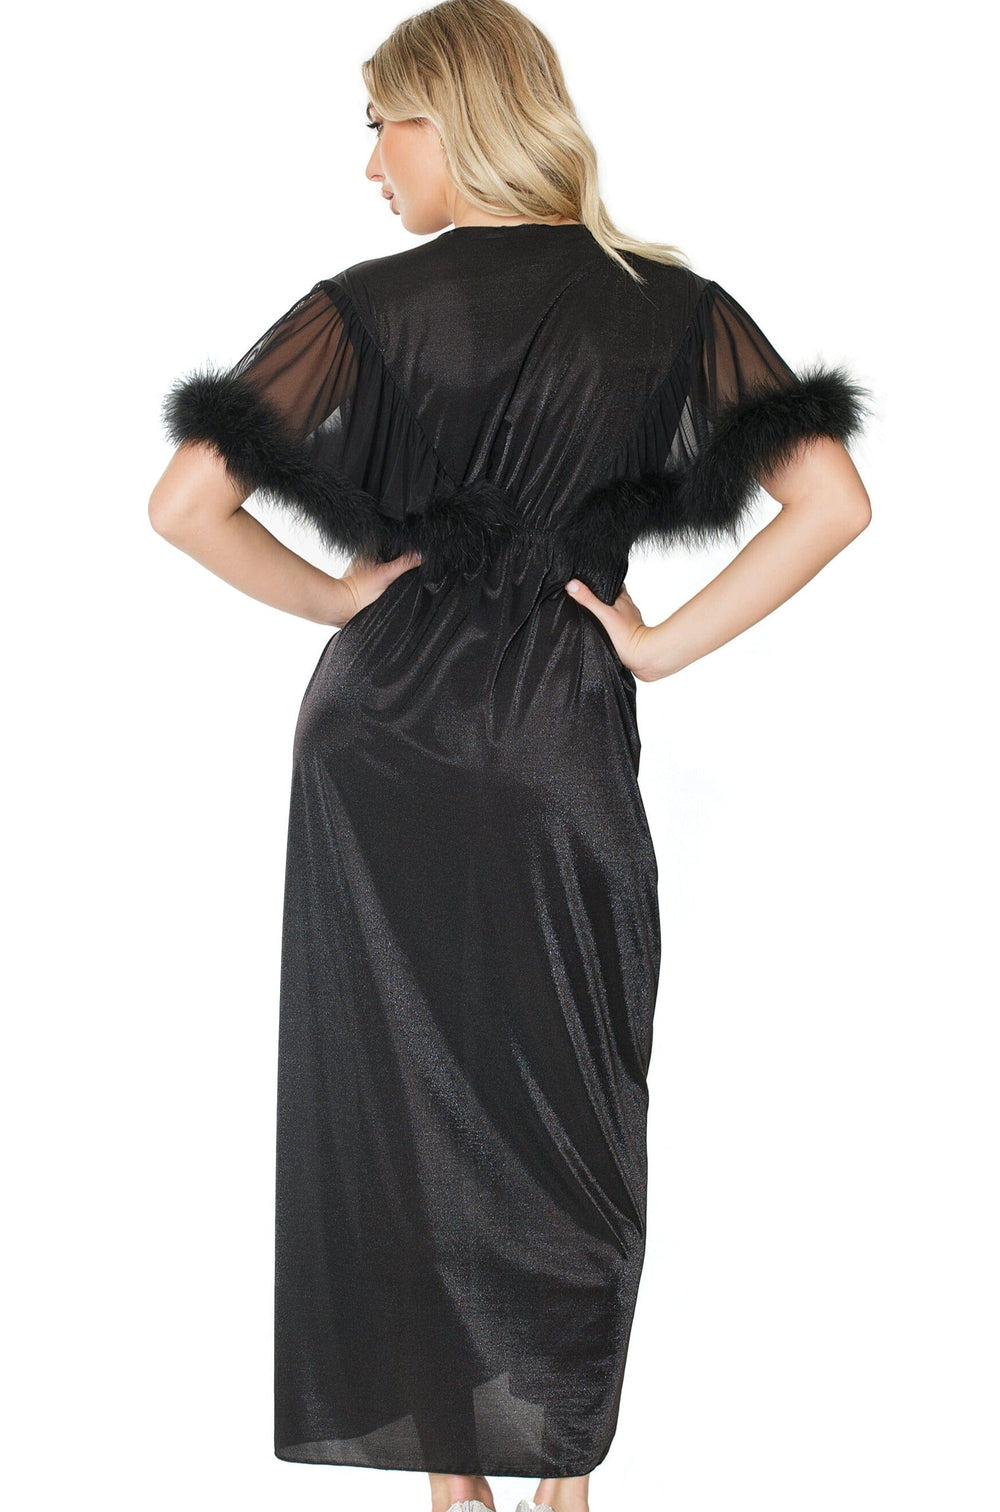 Robe-Gowns + Robes-Coquette-Black-O/S-SEXYSHOES.COM